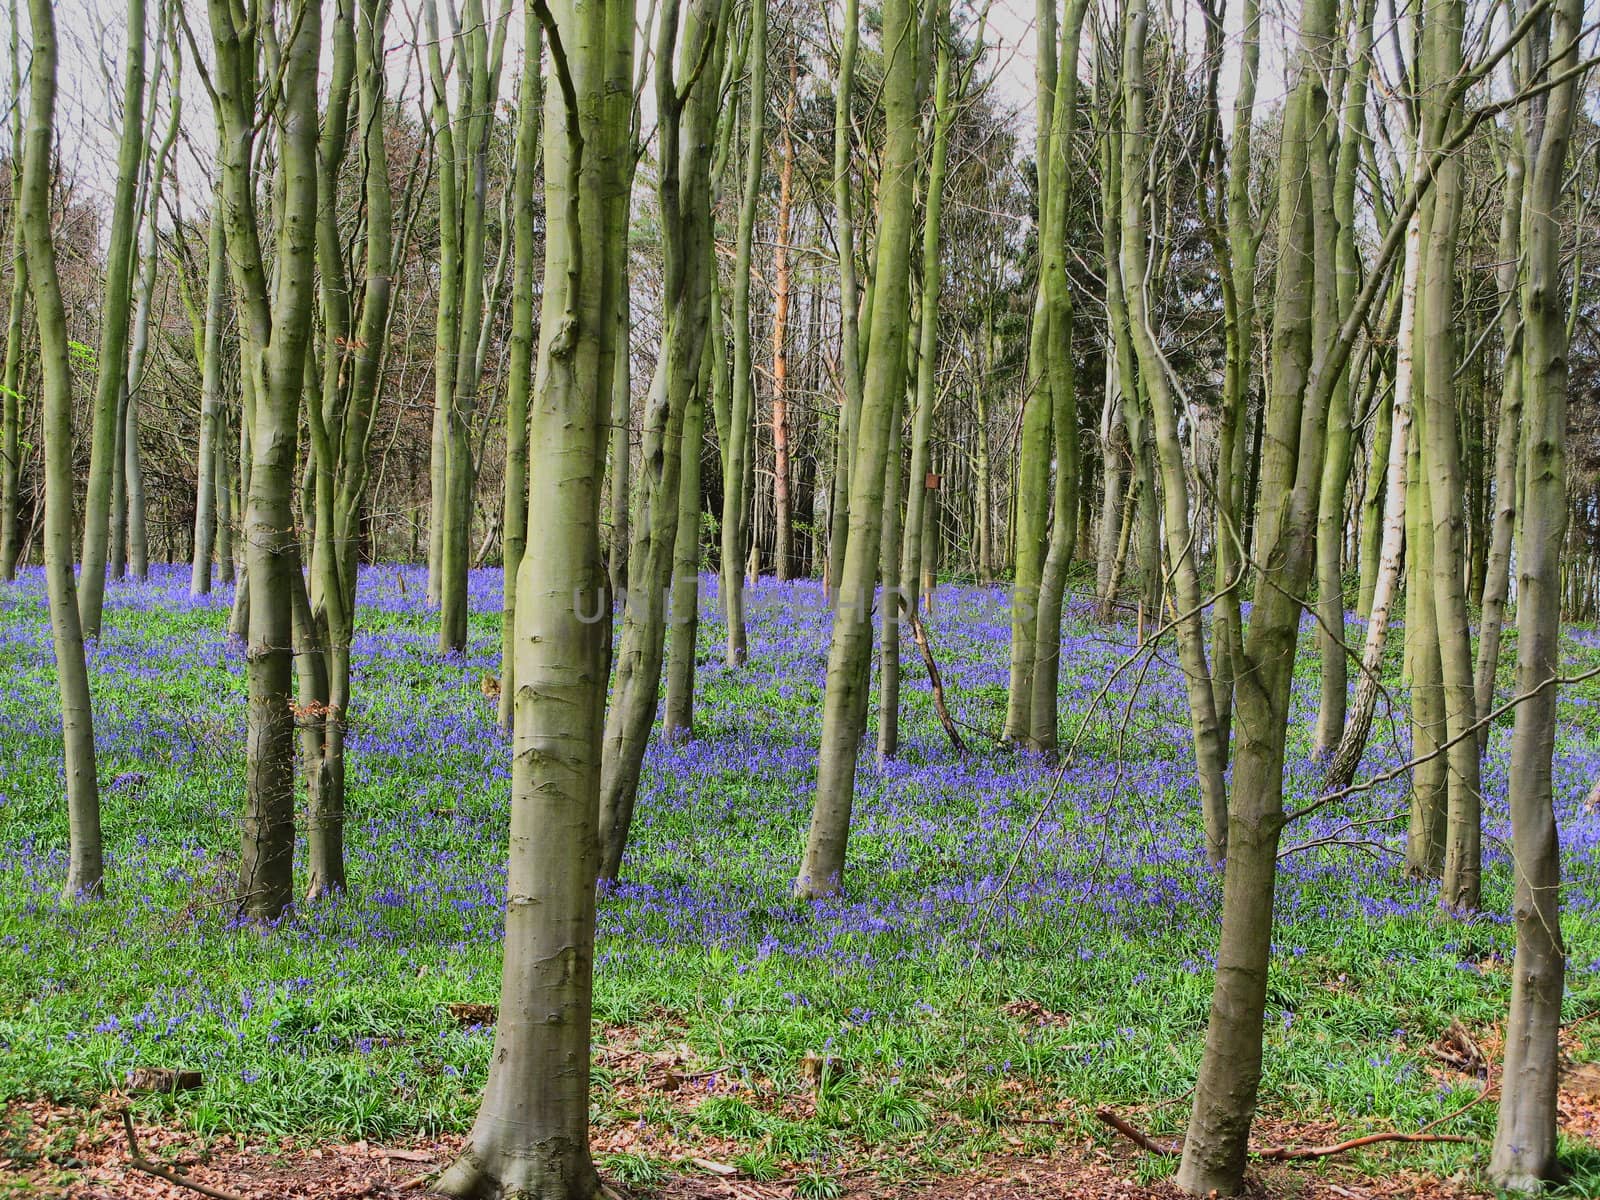 Bluebells in bloom in a wood